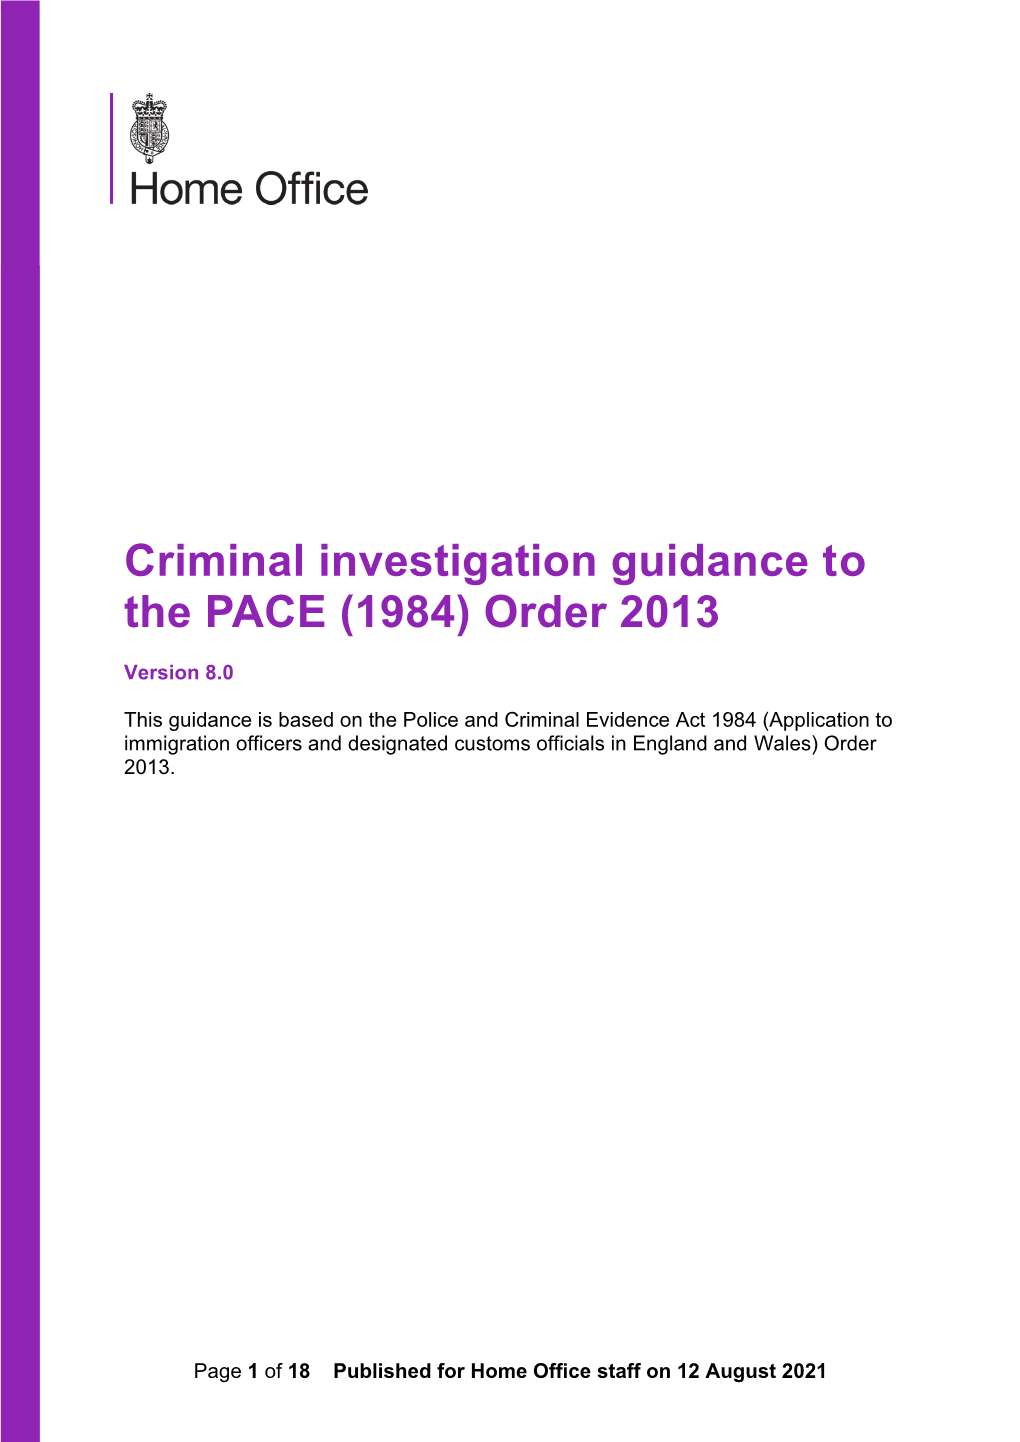 Criminal Investigation Guidance to the PACE (1984) Order 2013